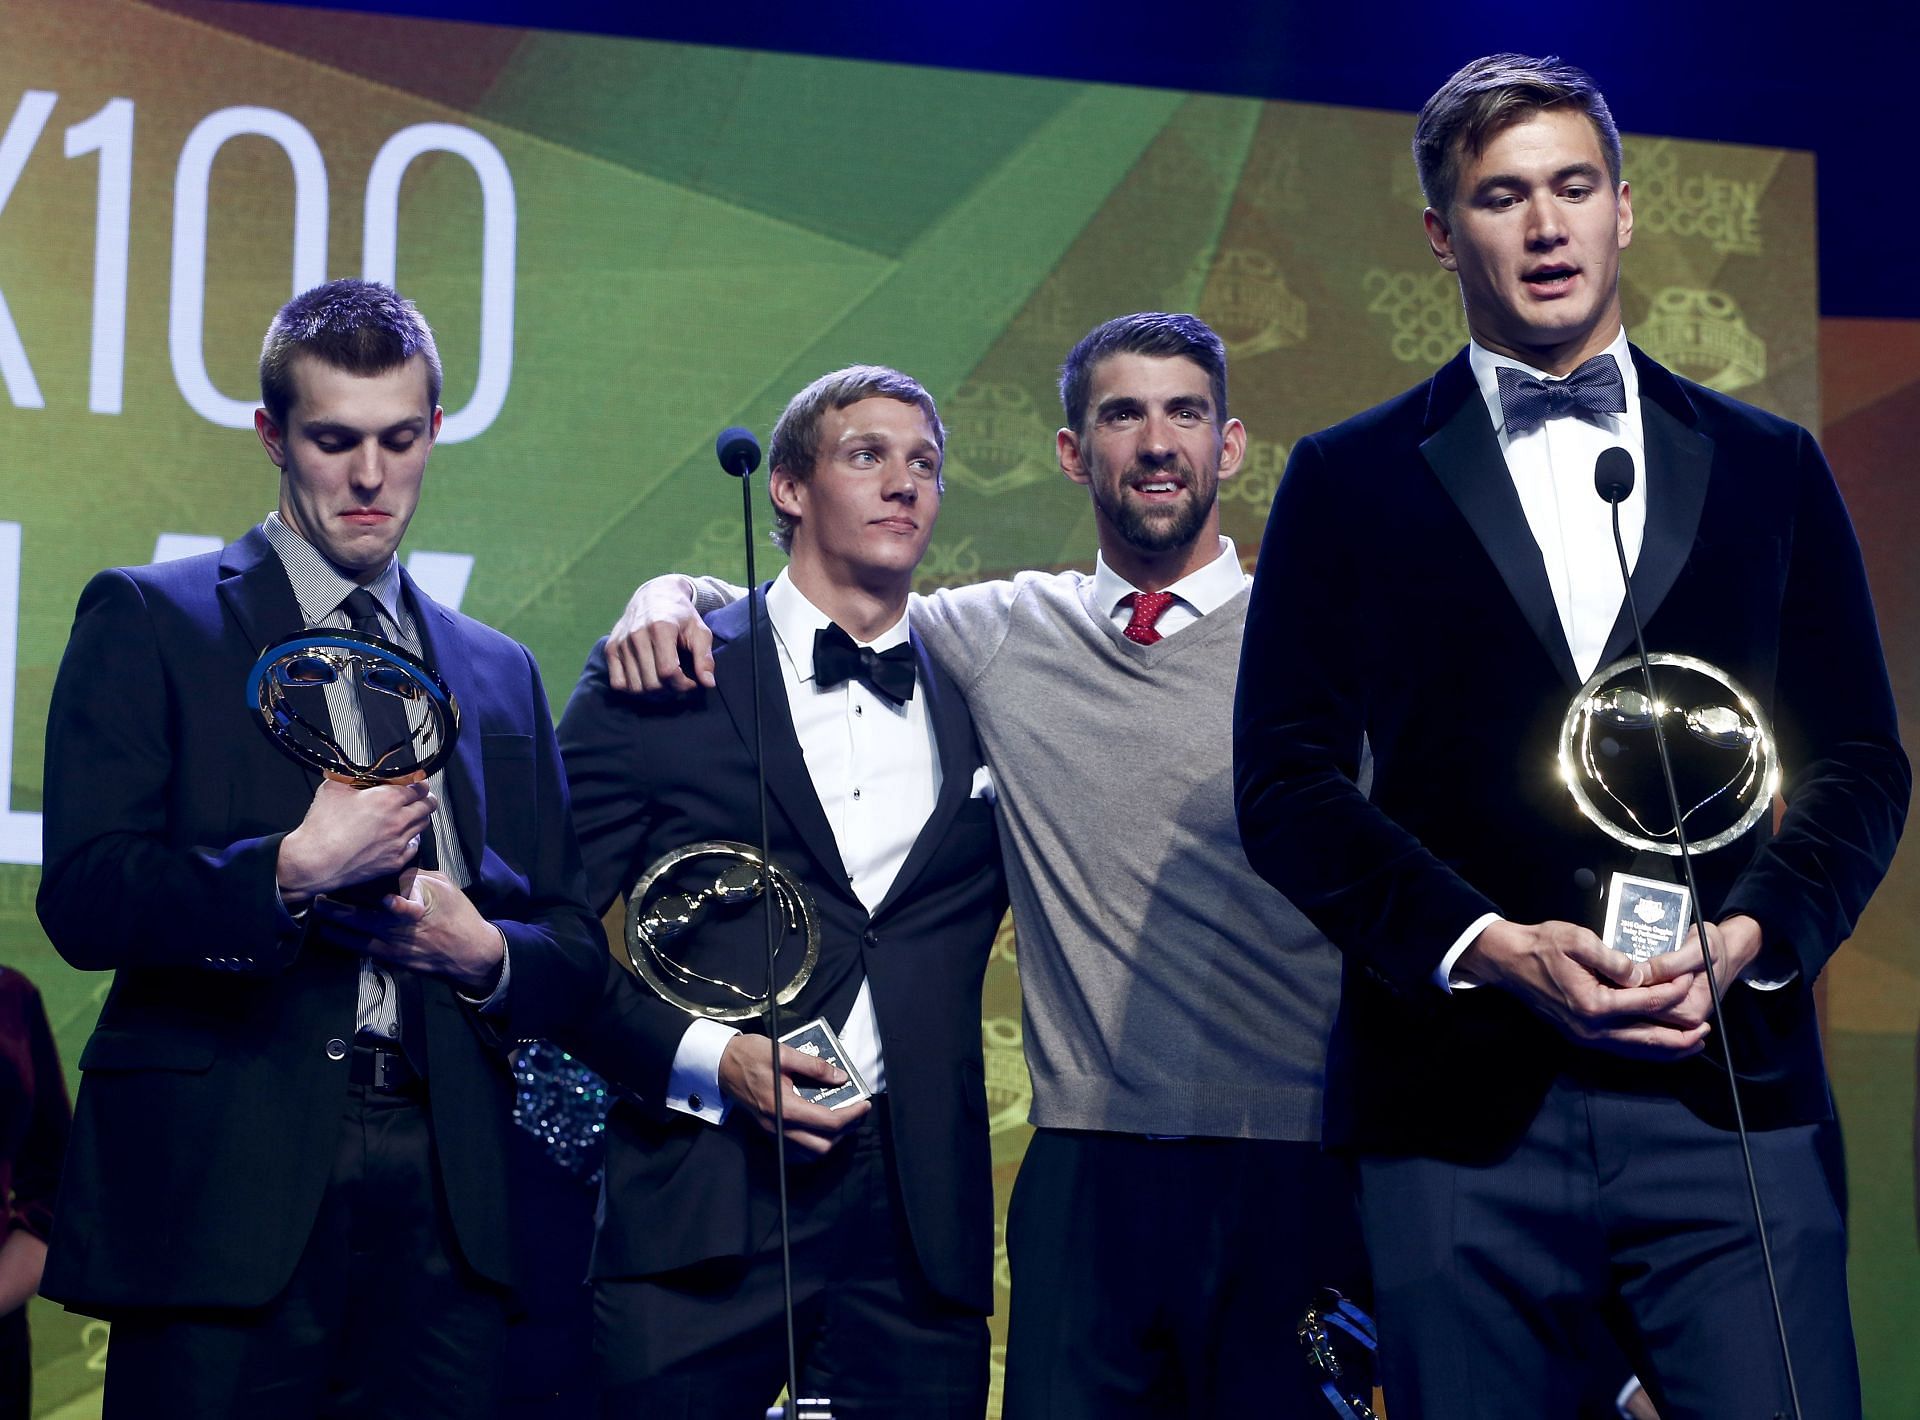 Dressel and Phelps with the USA relay team at the 2016 Golden Goggle Awards (Photo by Jeff Zelevansky/Getty Images)